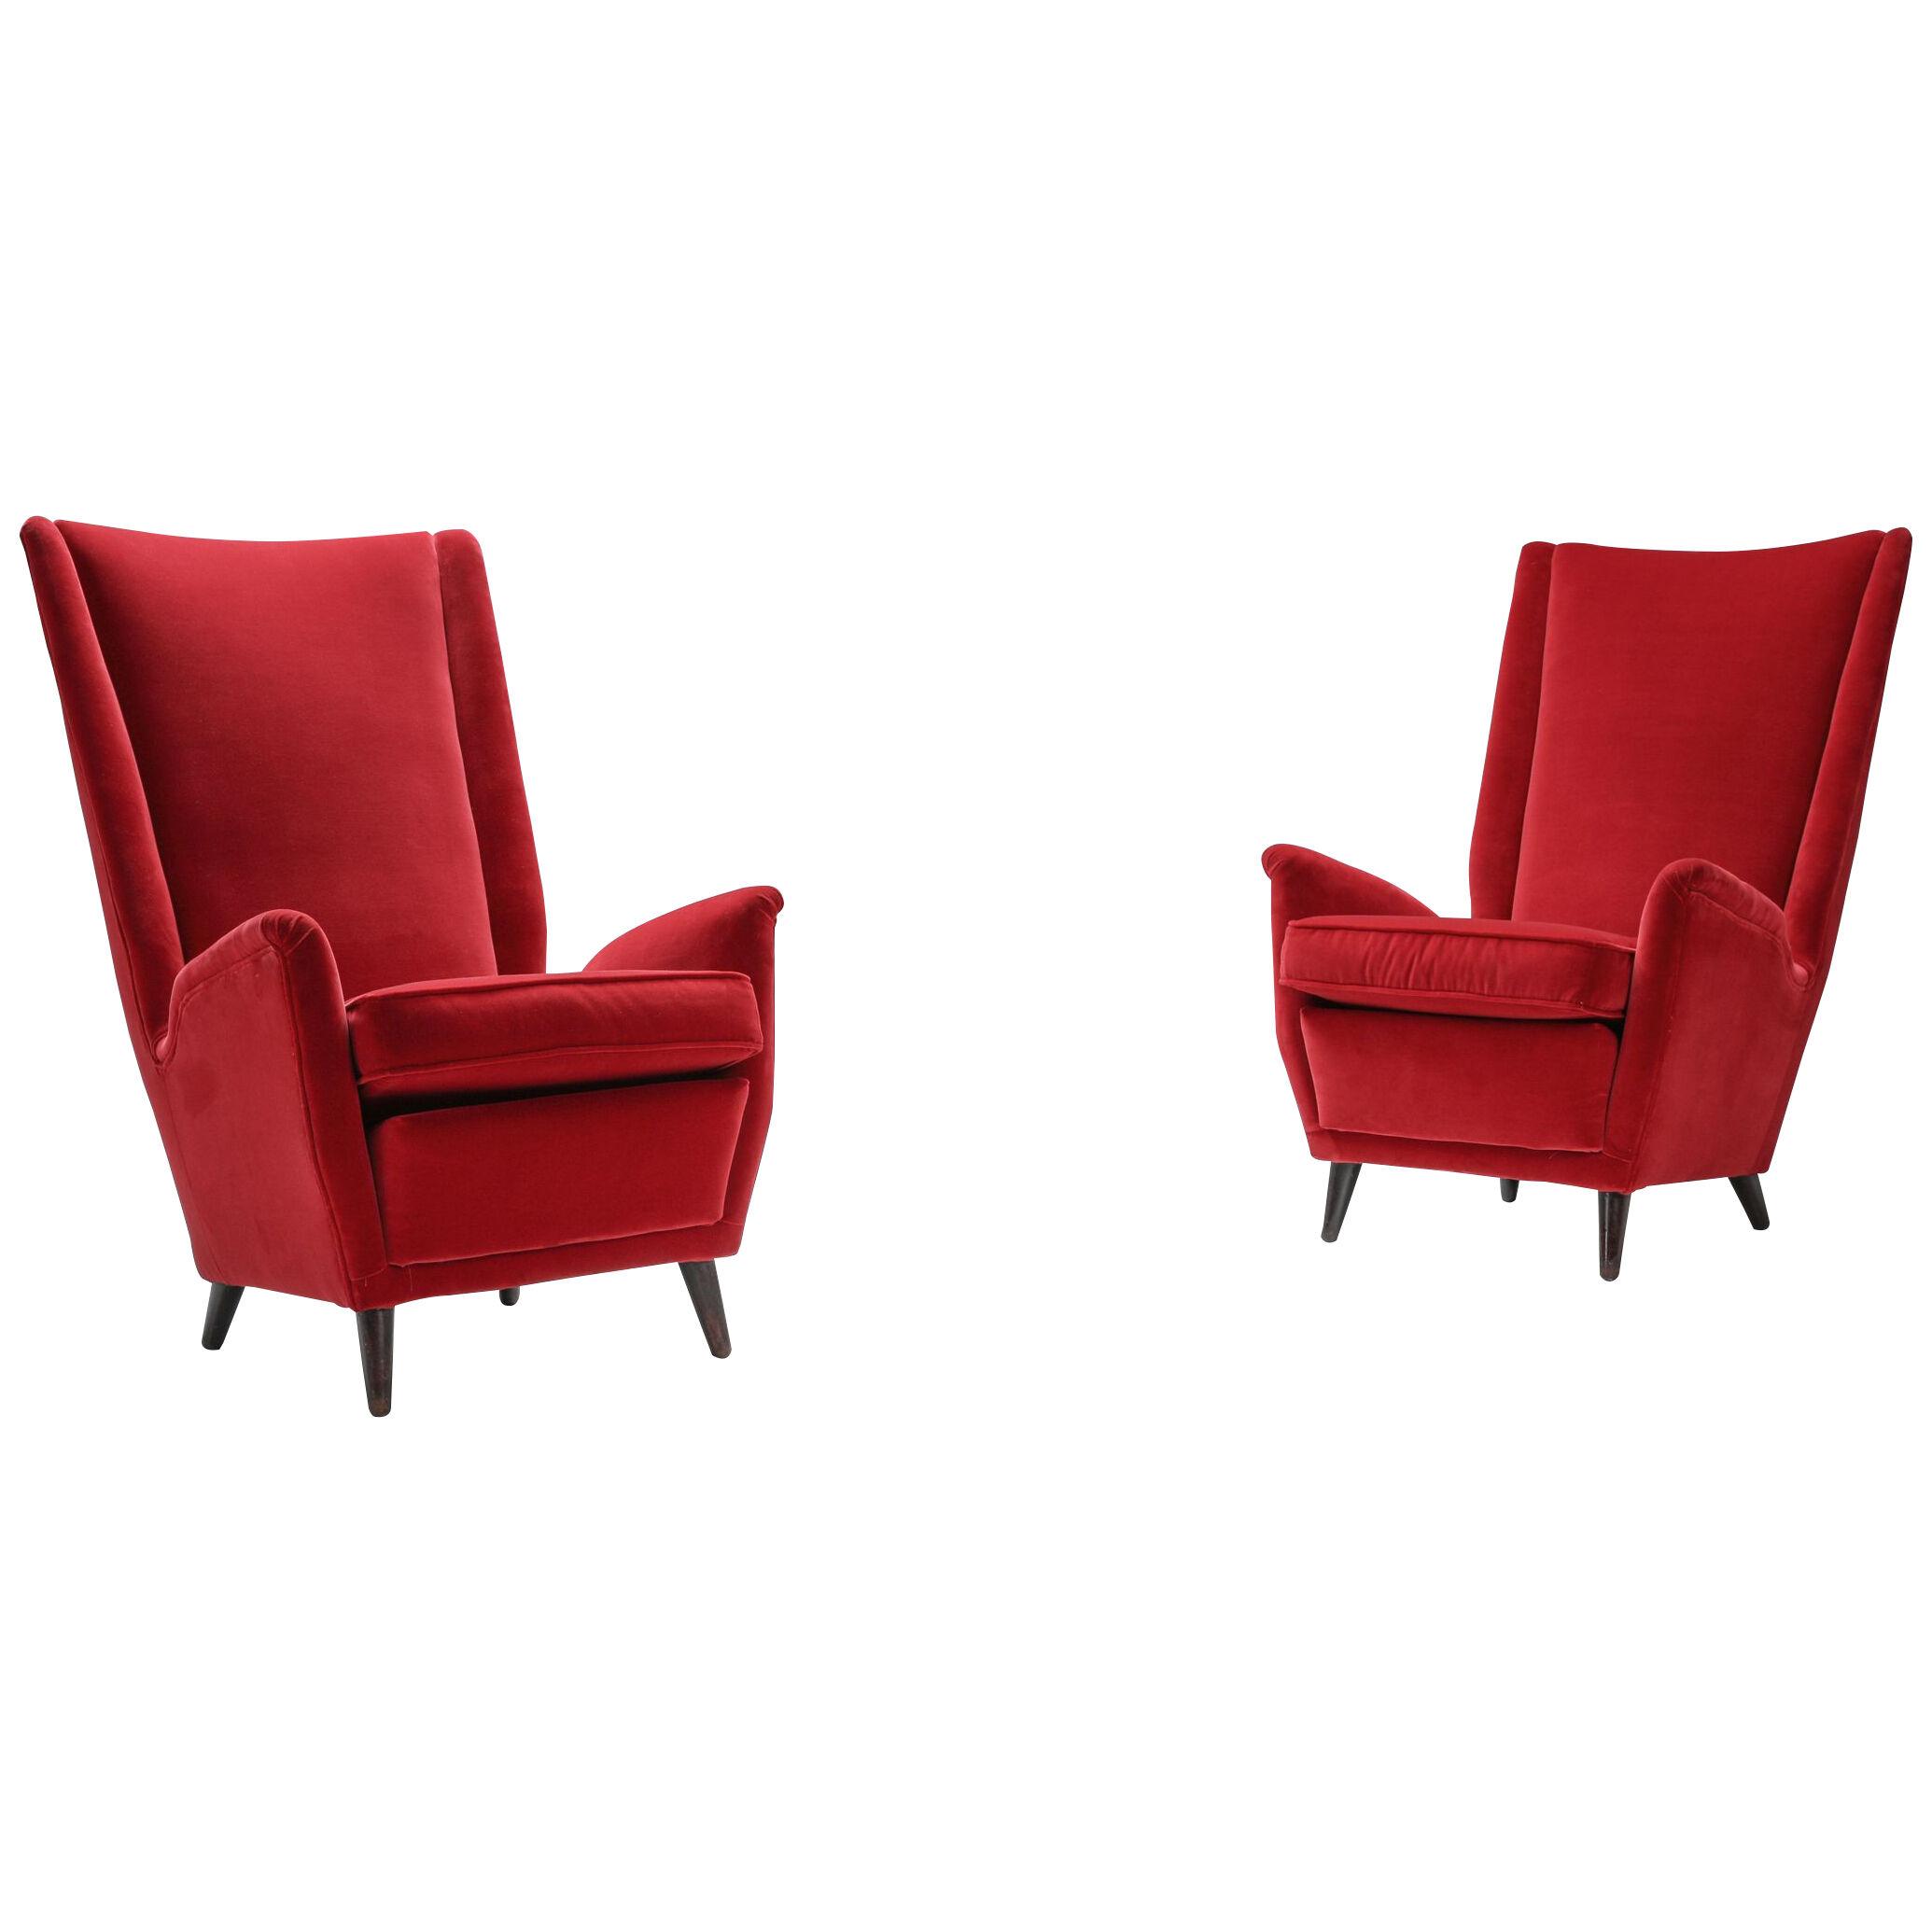 Set of Italian Red Armchairs by Gio Ponti - 1950's